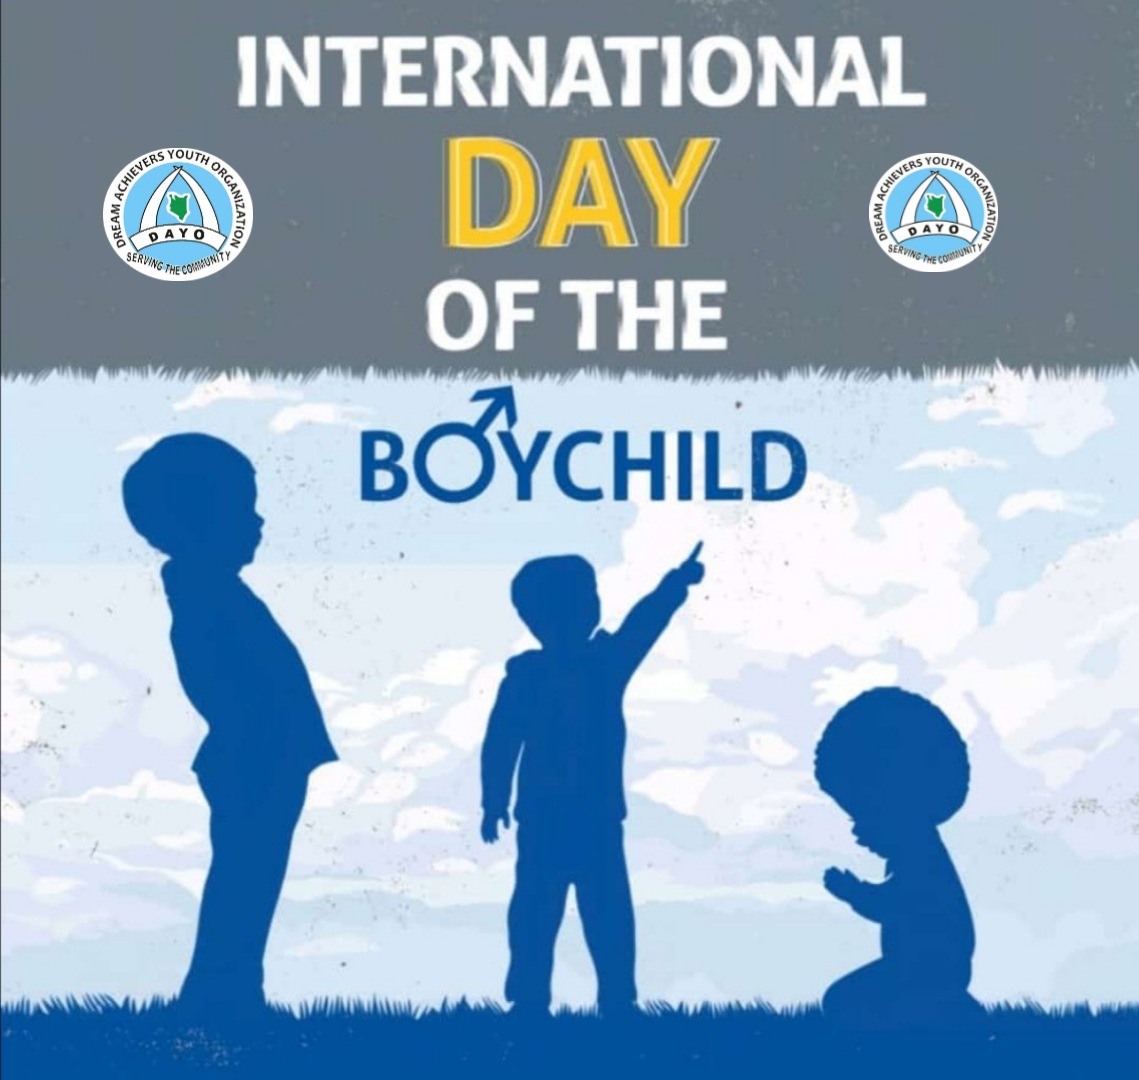 The boy child is important The boy child needs to be protected The boy child needs to be love The boy child needs affection Happy international boy child day #InternationalBoyChildDay #DayoSpeaks